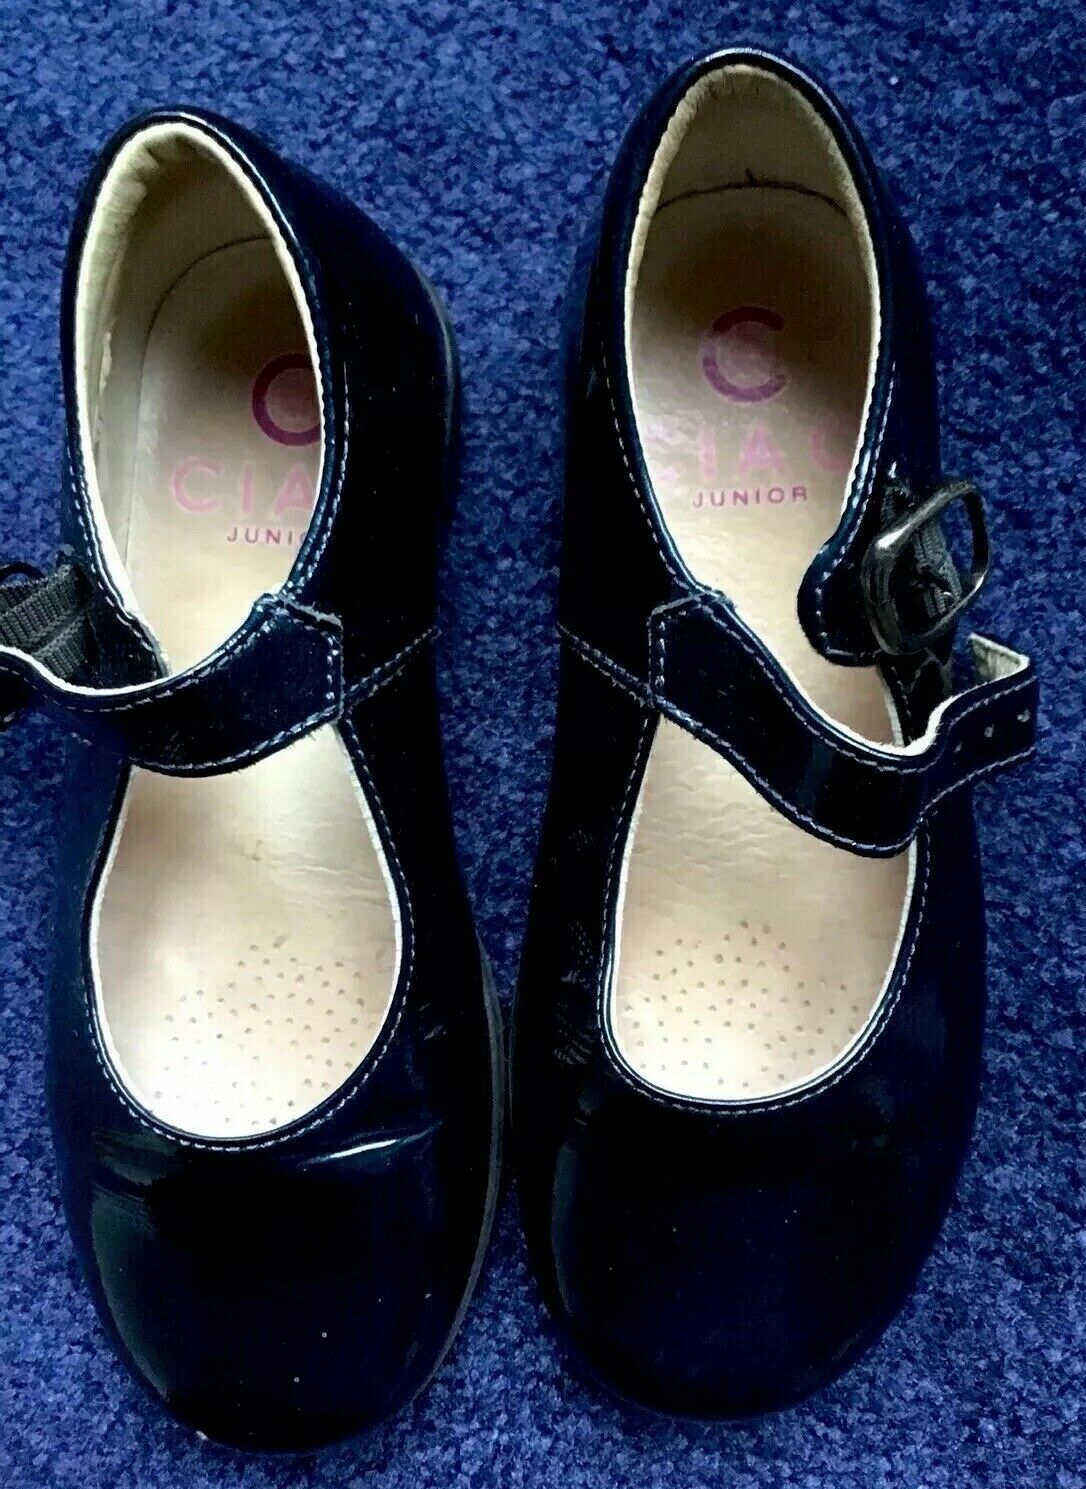 MADE IN ITALY CIAO JUNIOR GIRLS DRESS SHOES SZ 27 US SZ 10